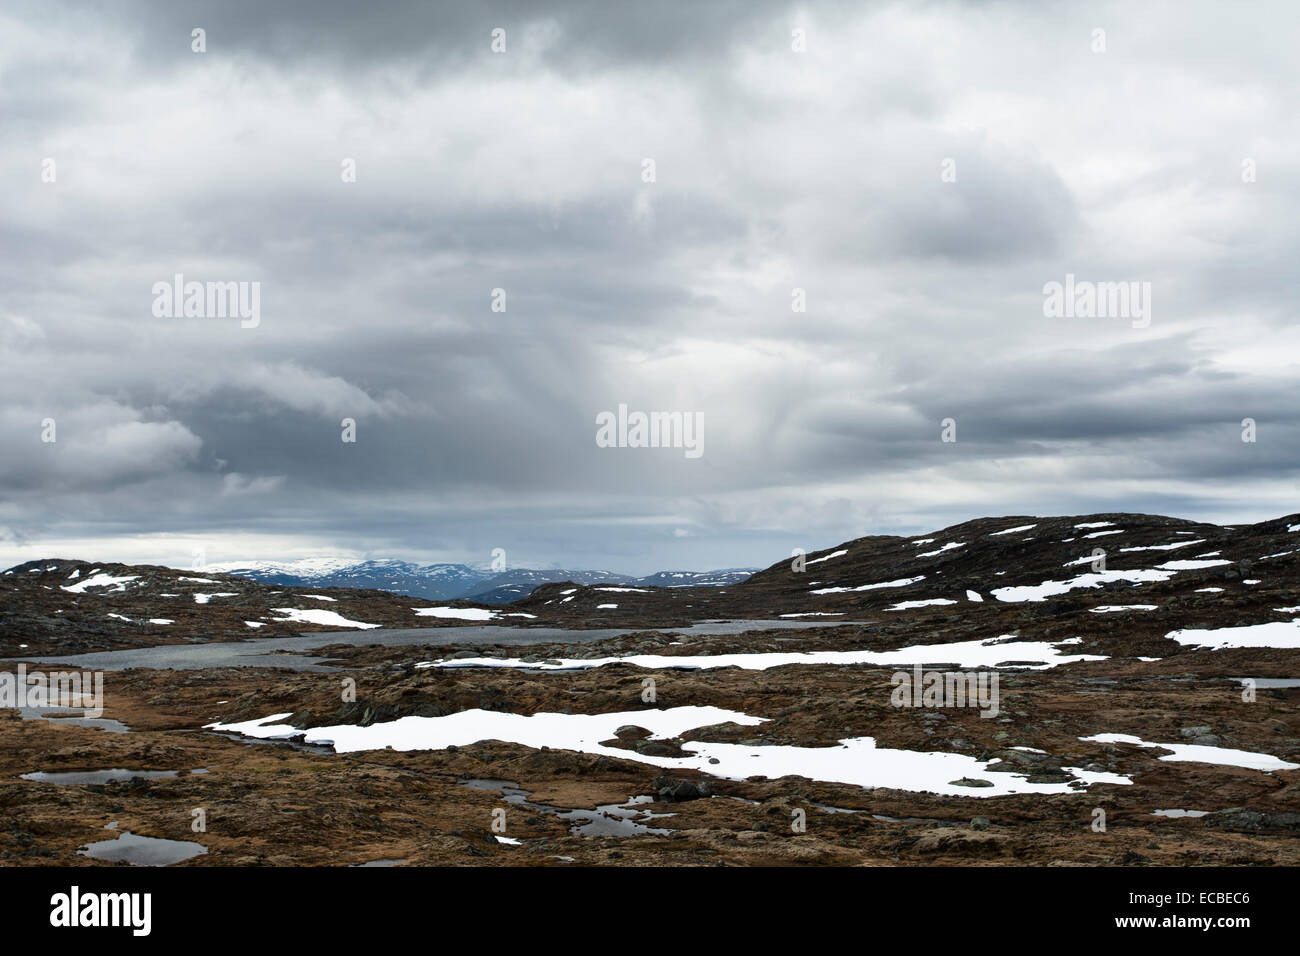 Pools and patches of snow on the Hardangervidda Plateau (Hardangervidda), Buskerud, Norway Stock Photo